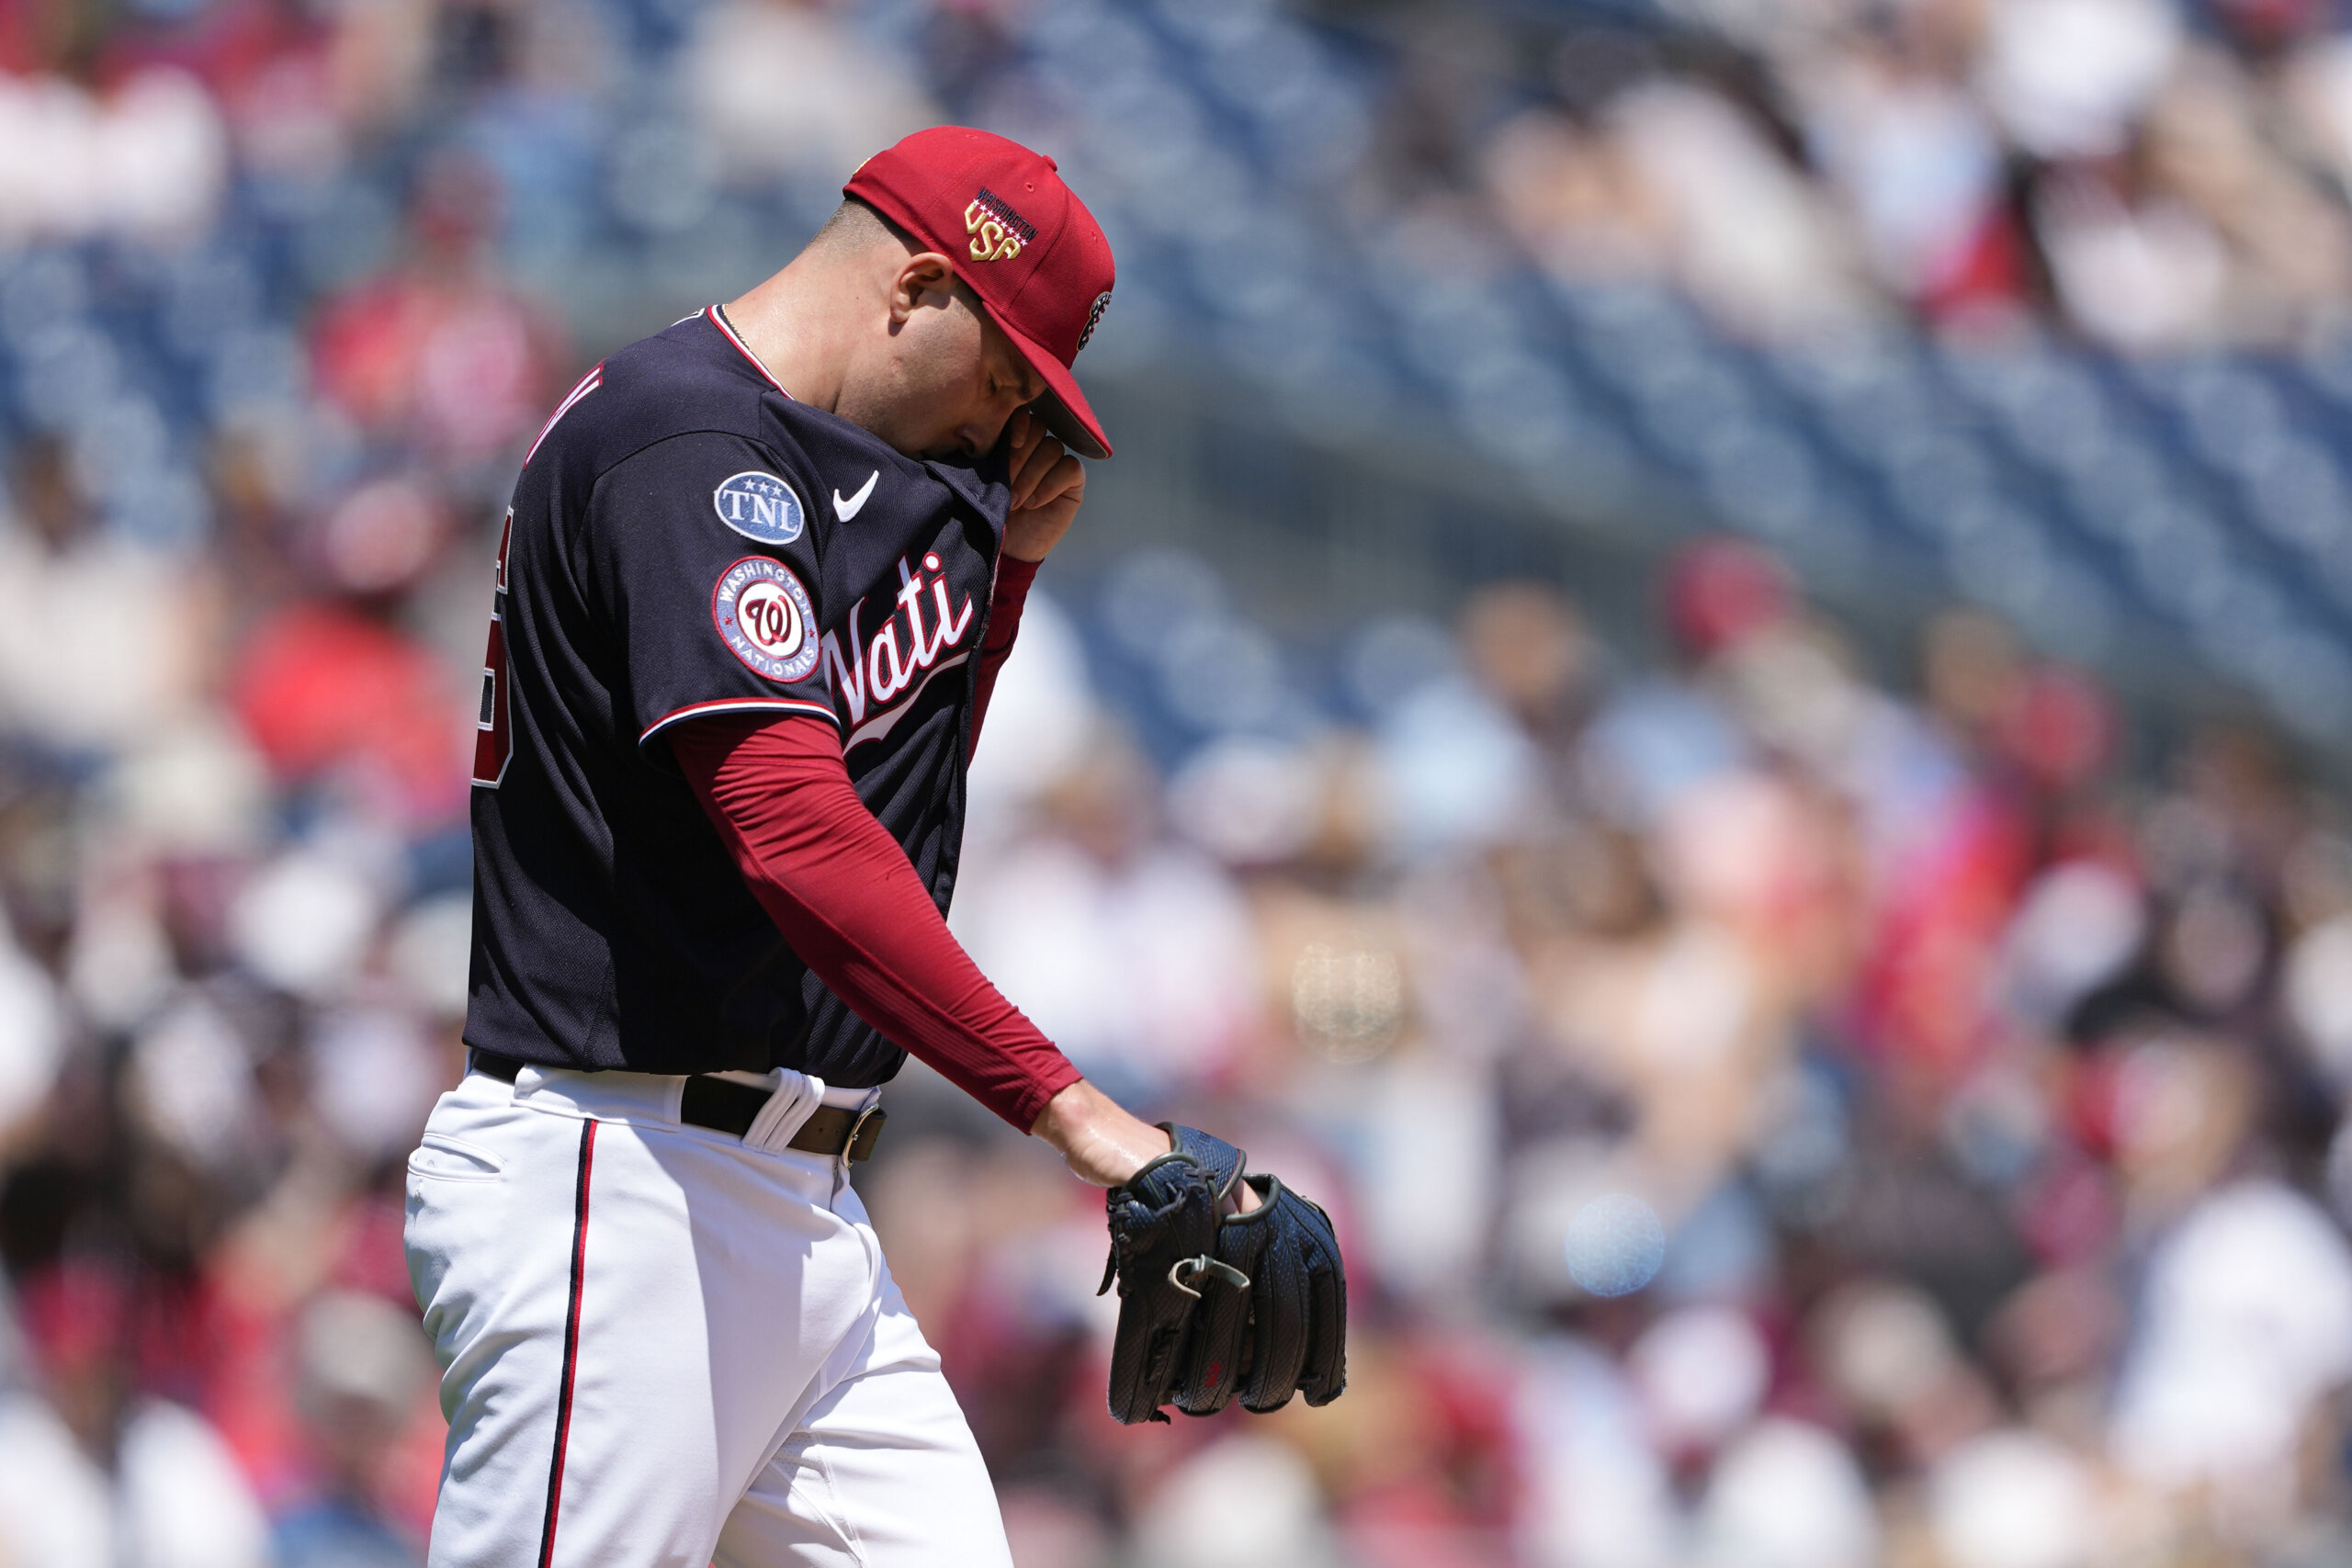 Washington Nationals' Patrick Corbin shows signs of life late in